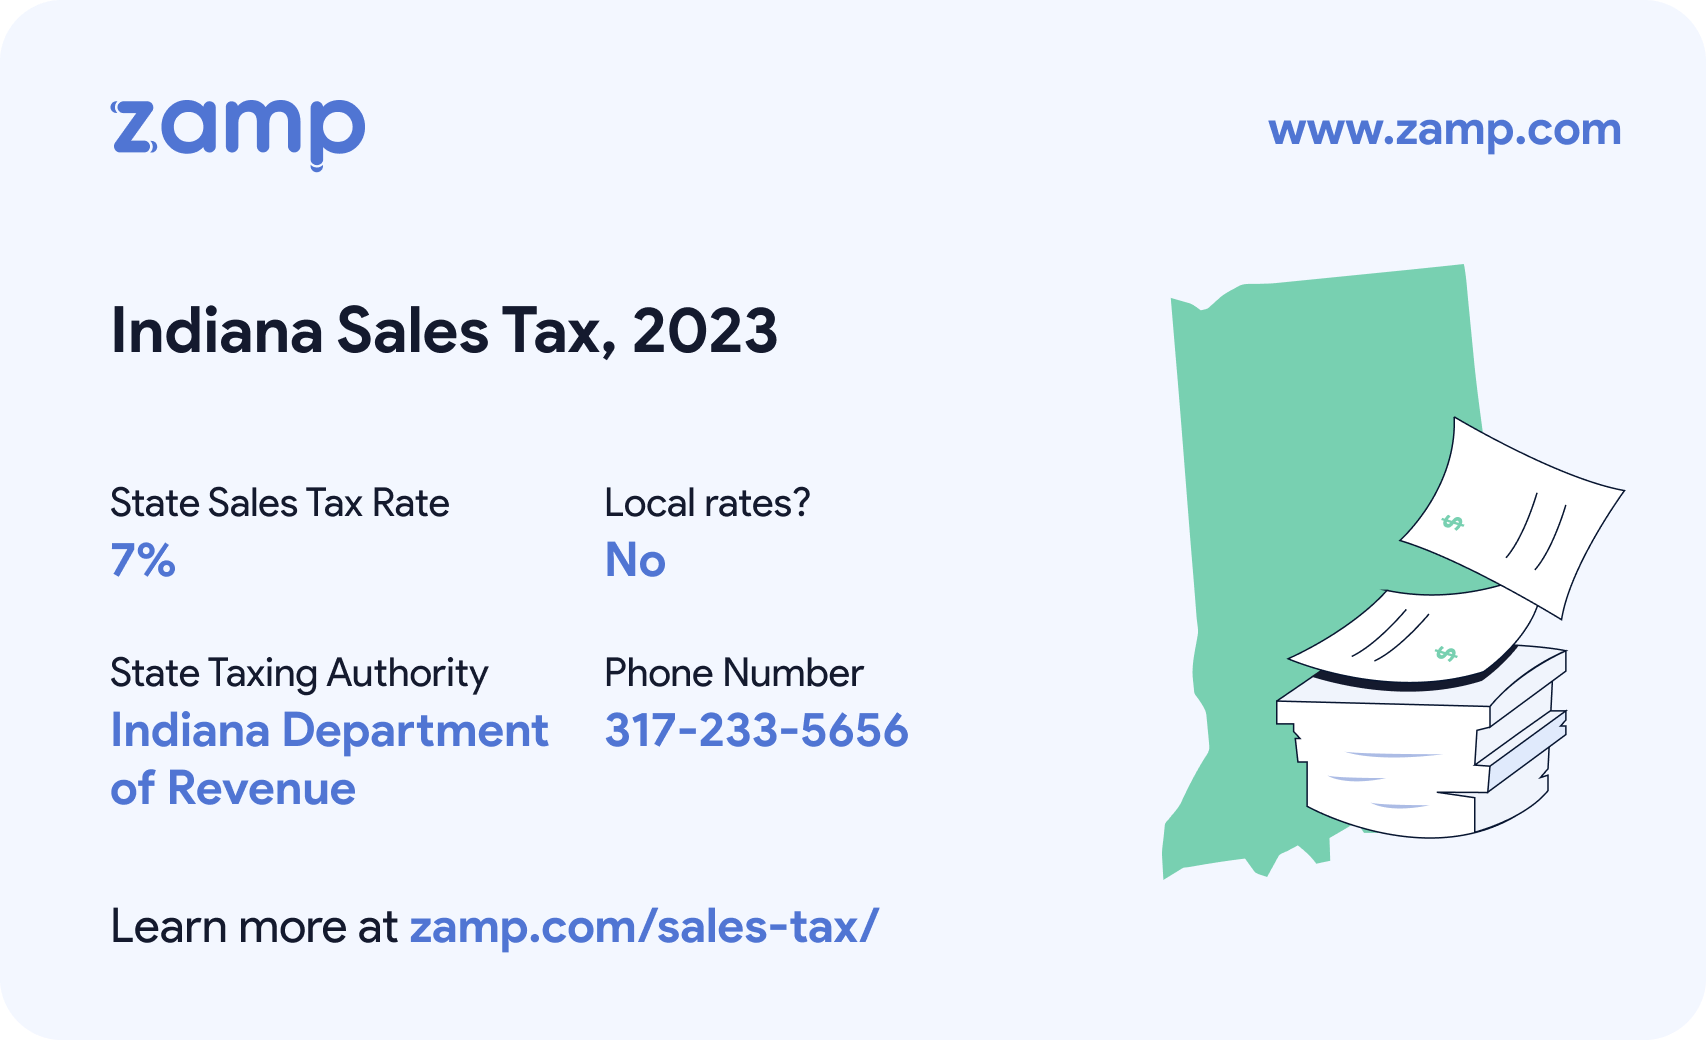 Indiana basic sales tax info for 2023 - State sales tax rate: 7%, Local rates? No; State Taxing Authority: Indiana Department of Revenue; and phone number 317-233-5656